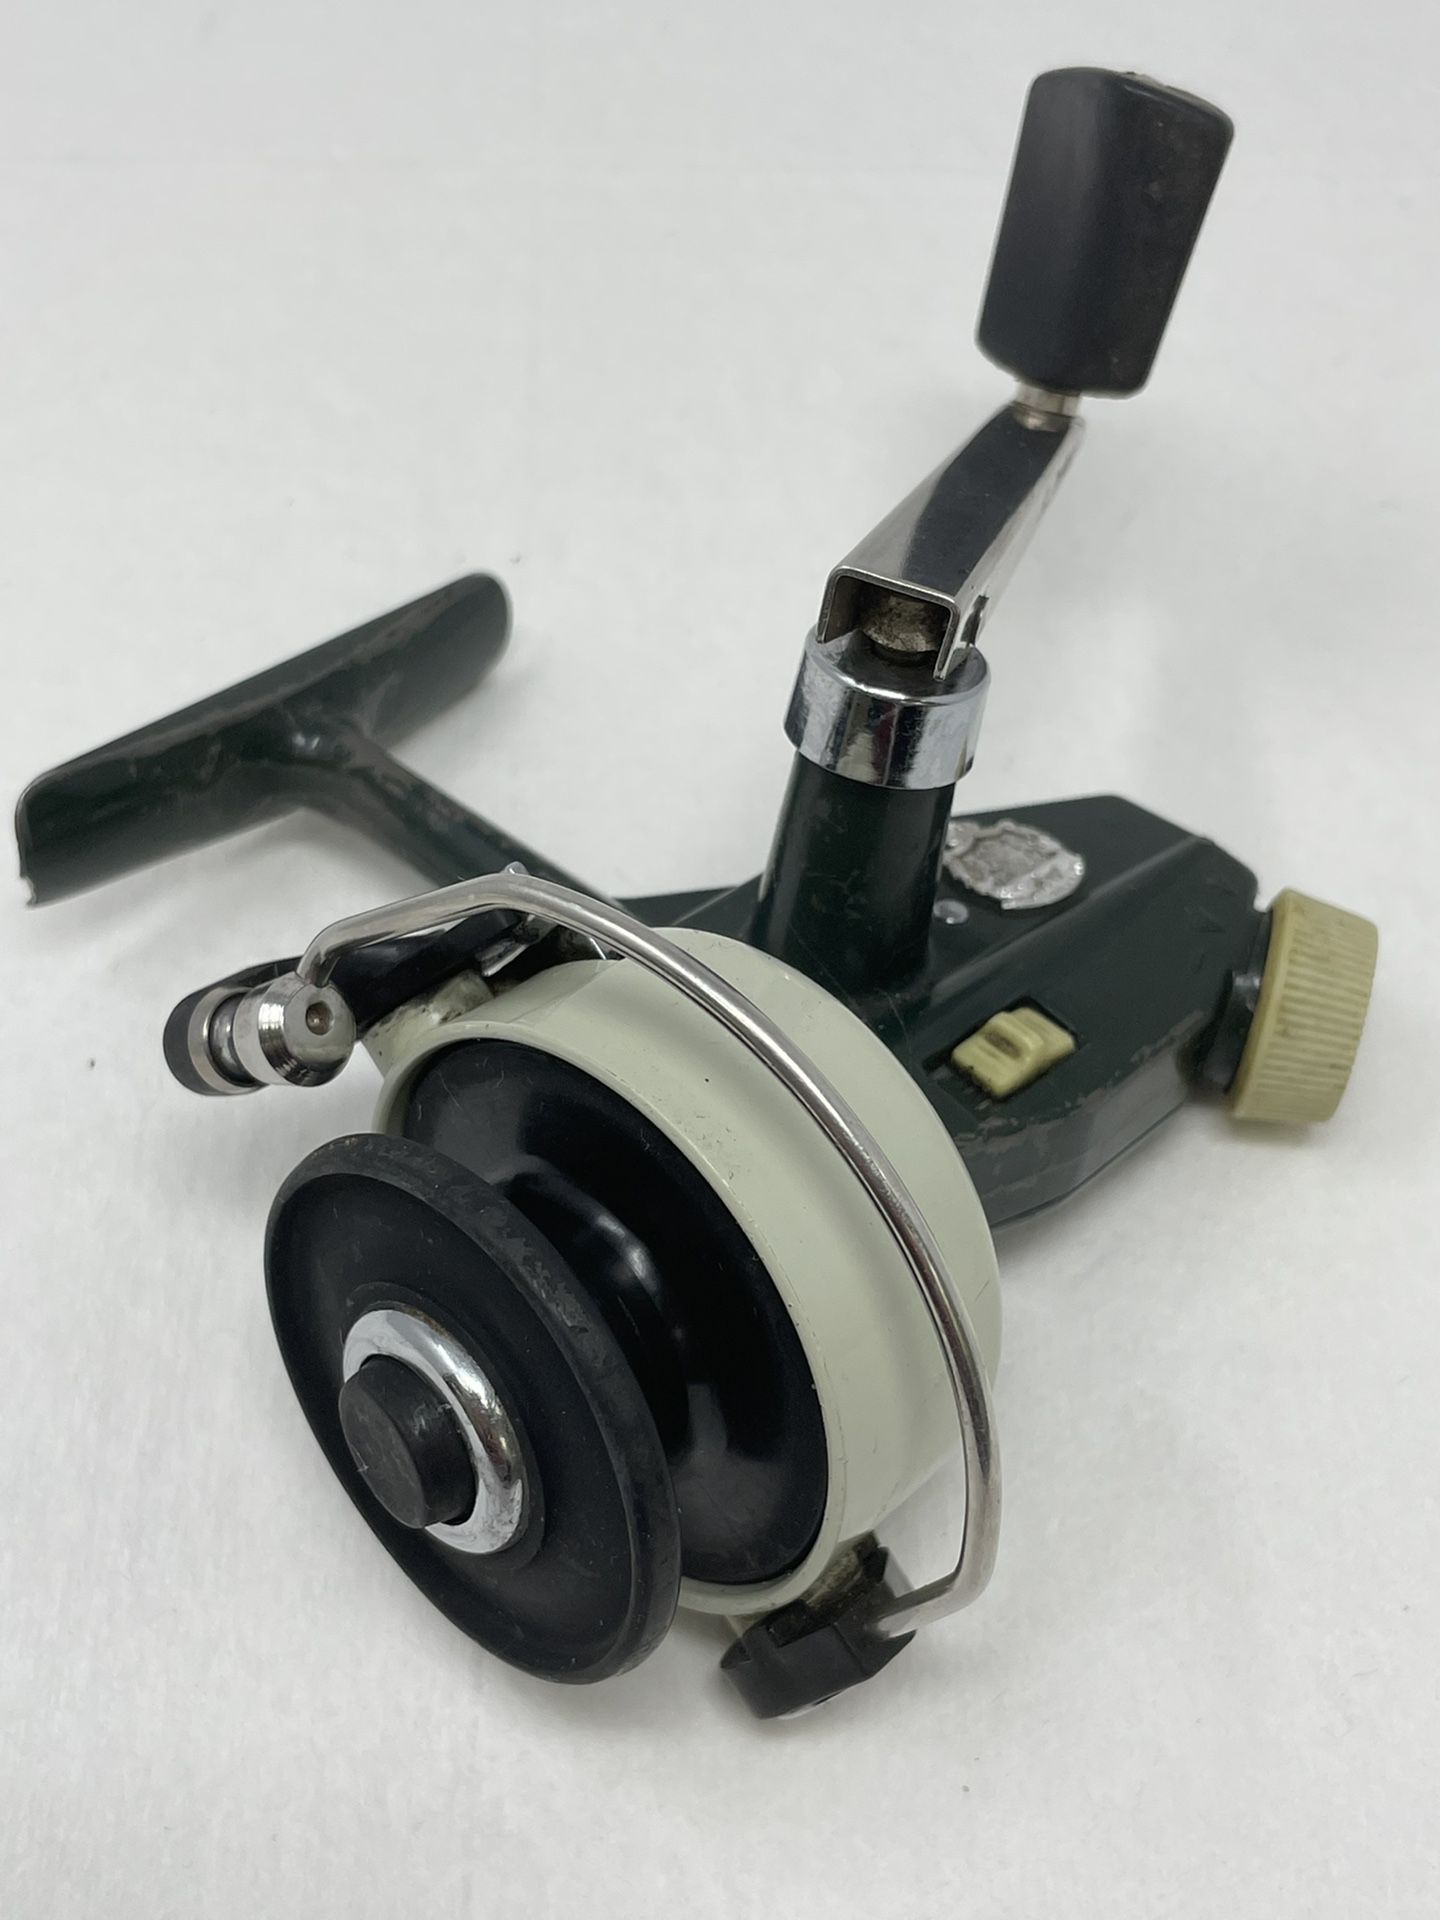 Zebco Cardinal 3 Vintage Spinning Reel for Sale in Lake Villa, IL - OfferUp